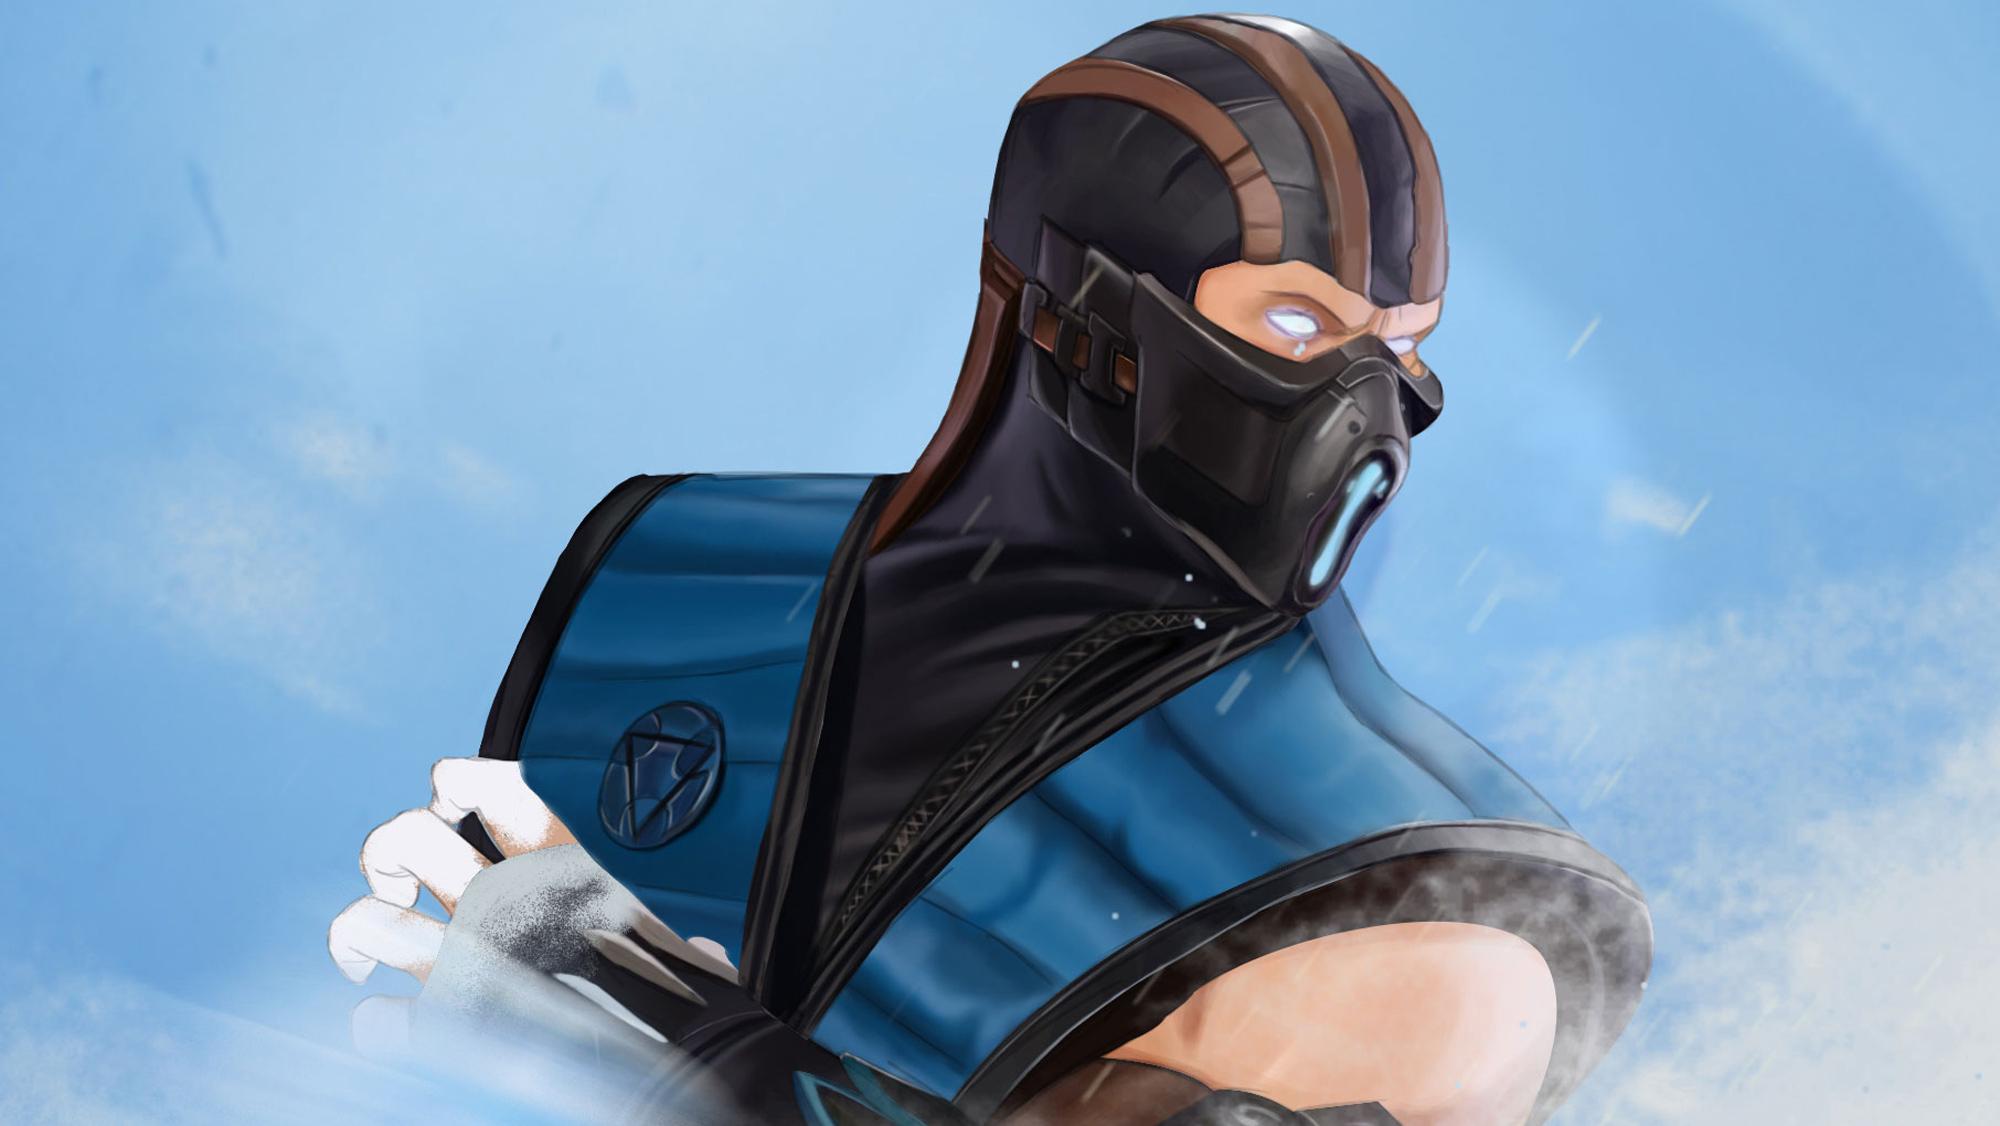 HD wallpaper, Hd Wallpapers, Sub Zero Wallpapers, Mortal Kombat Wallpapers, Scorpion Wallpapers, Subzero, Games Wallpapers